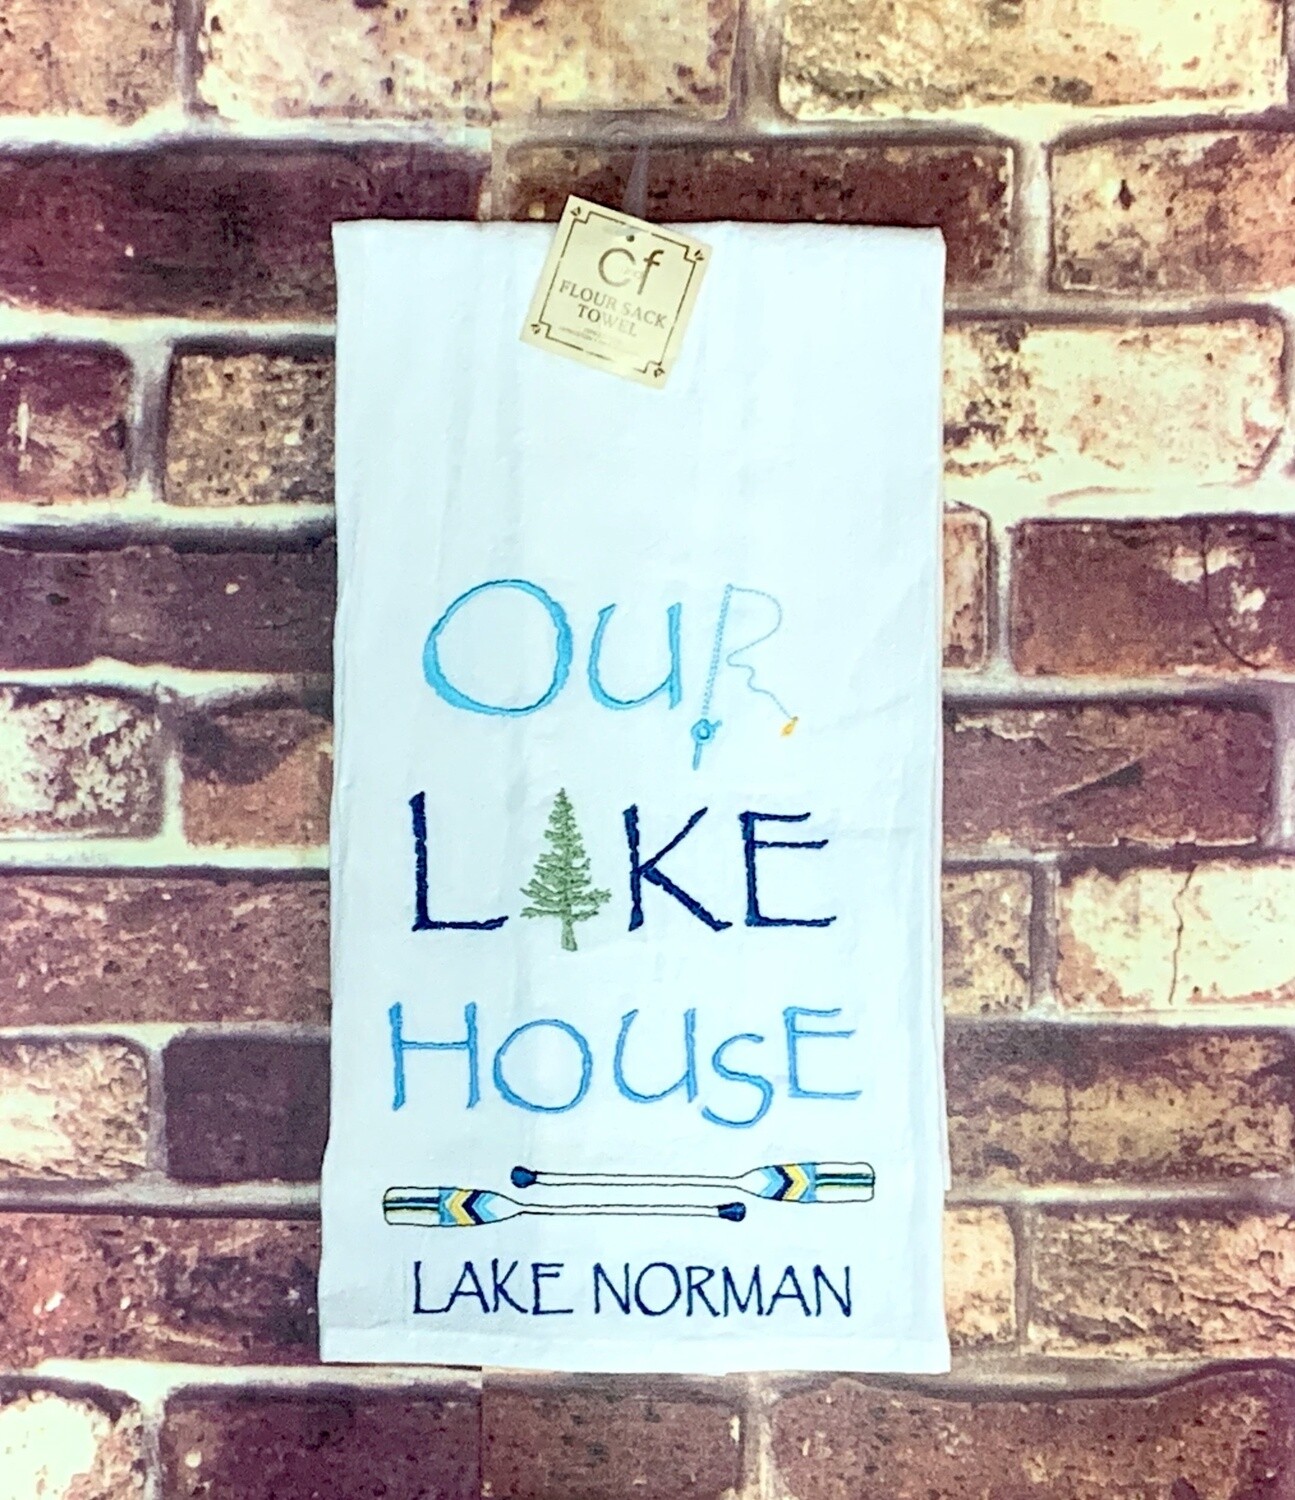 Our Lake House Towel